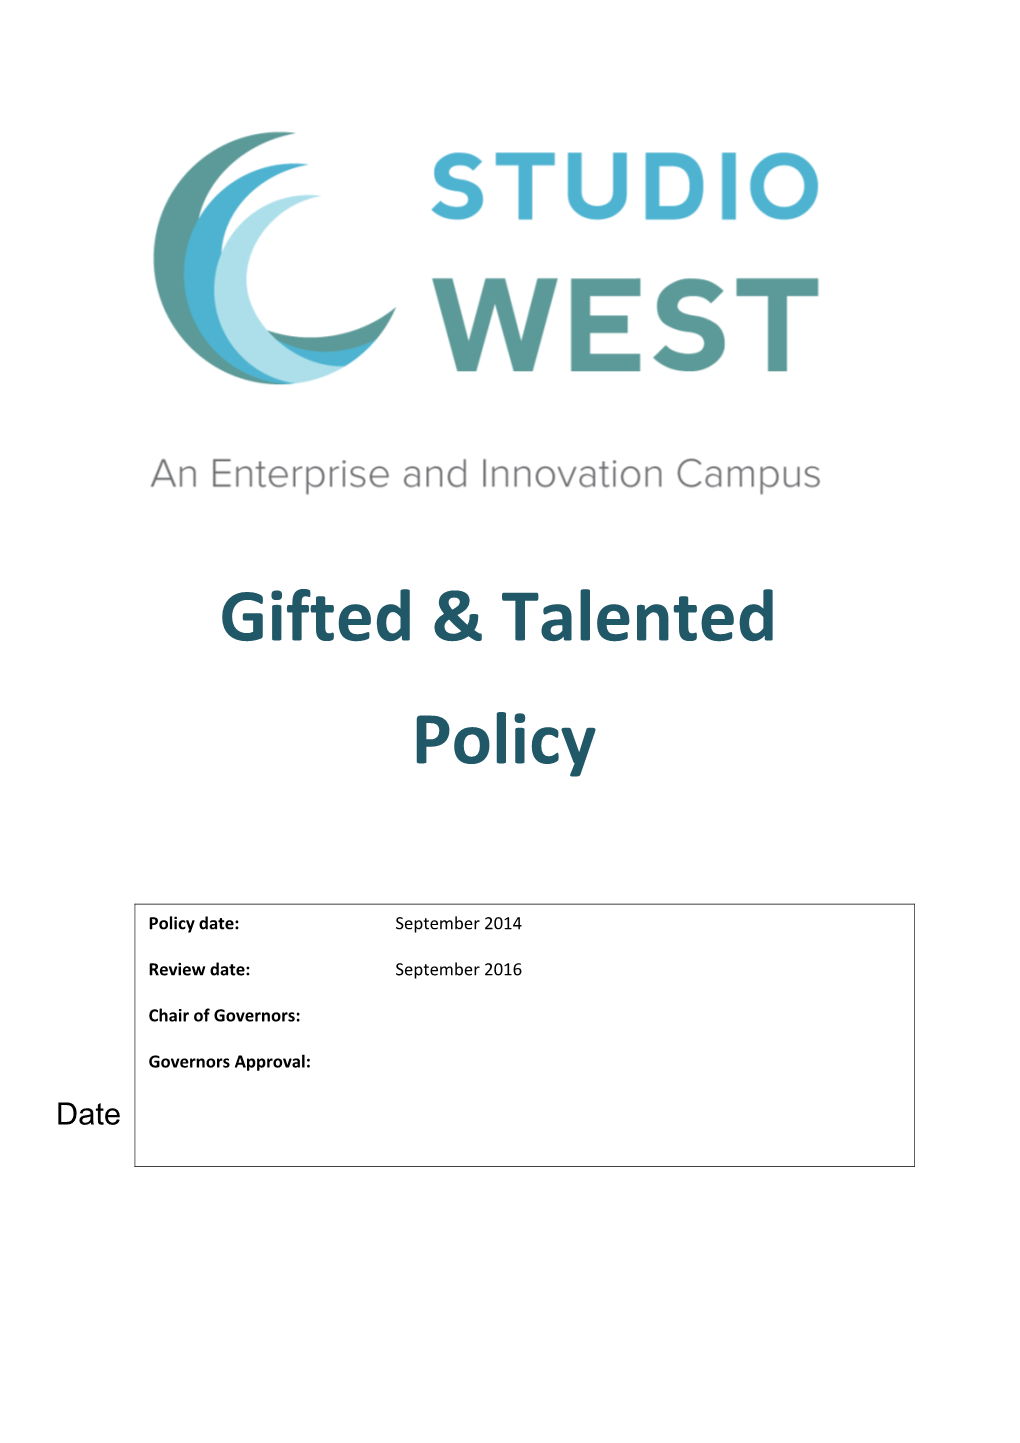 Studio West S Gifted & Talented Policy